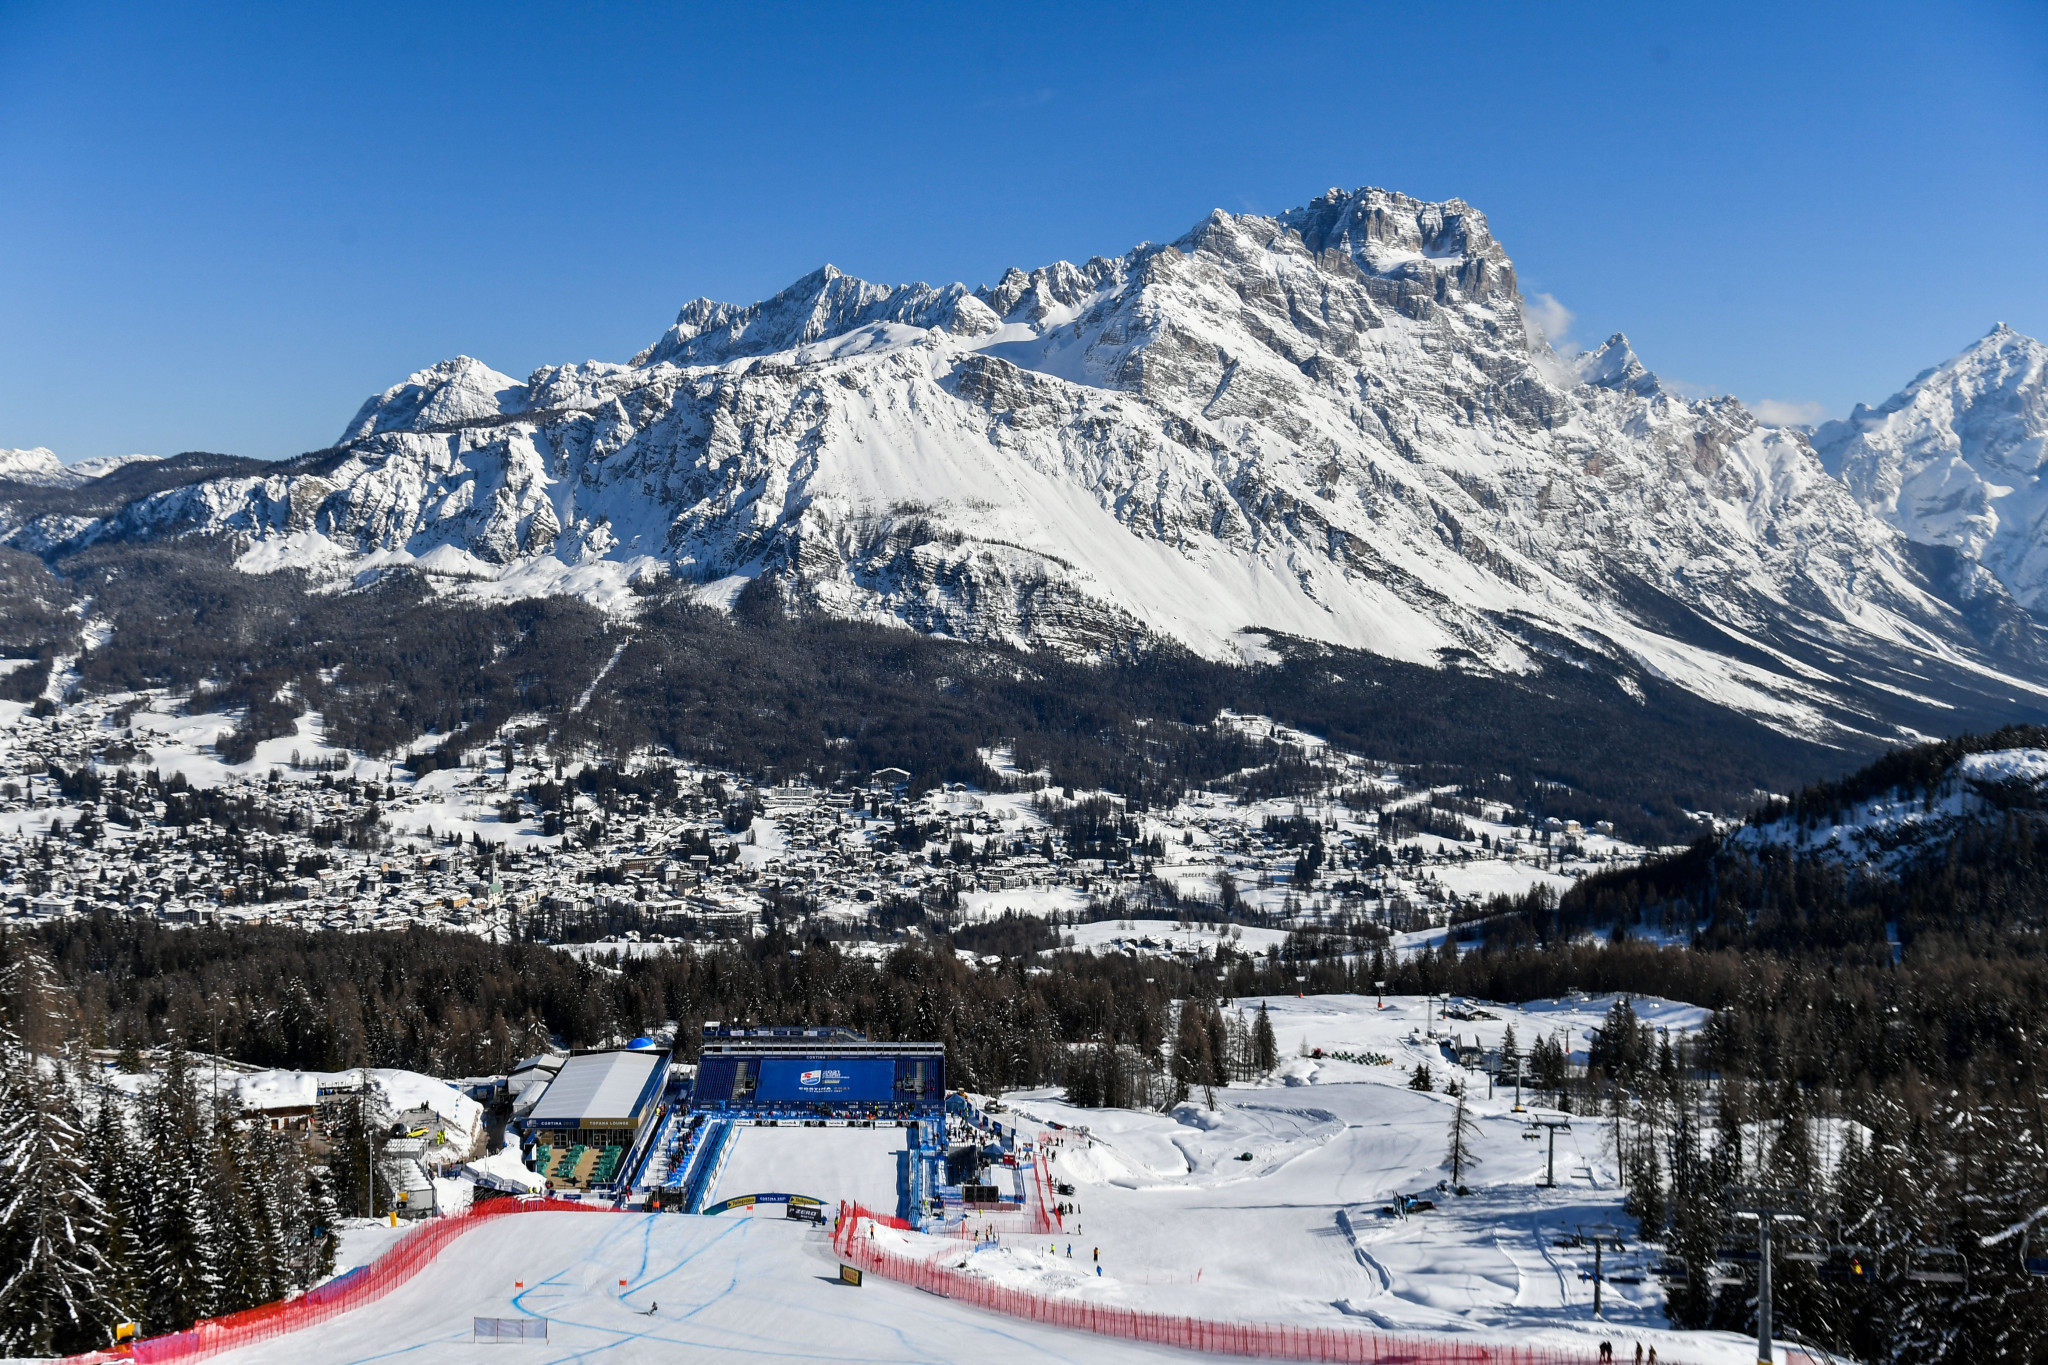 Milan Cortina 2026 is due to be held across an area covering 22,000 square kilometres ©Getty Images